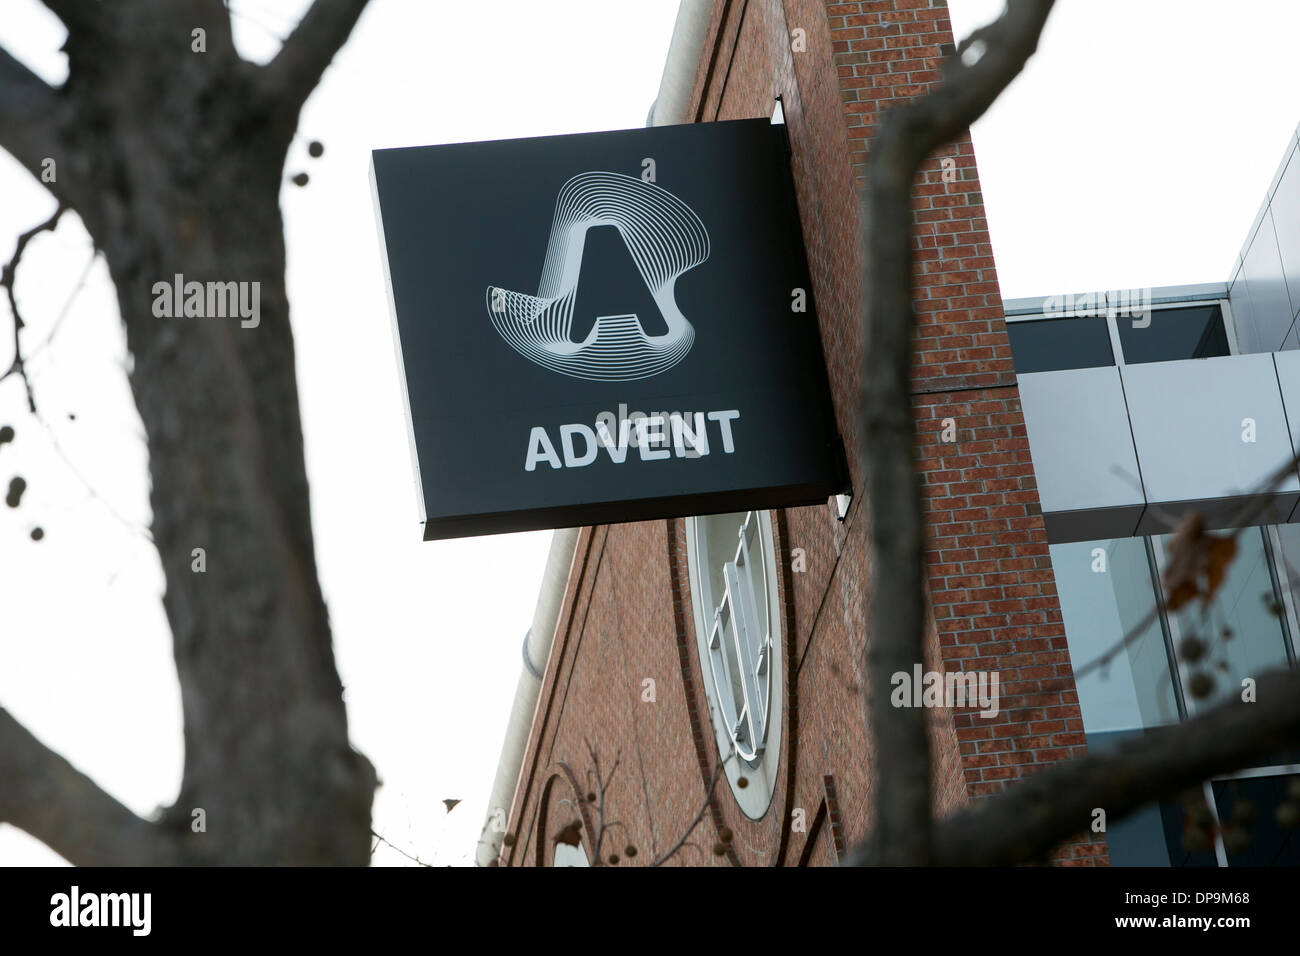 The headquarters of Advent software in San Francisco, California.  Stock Photo